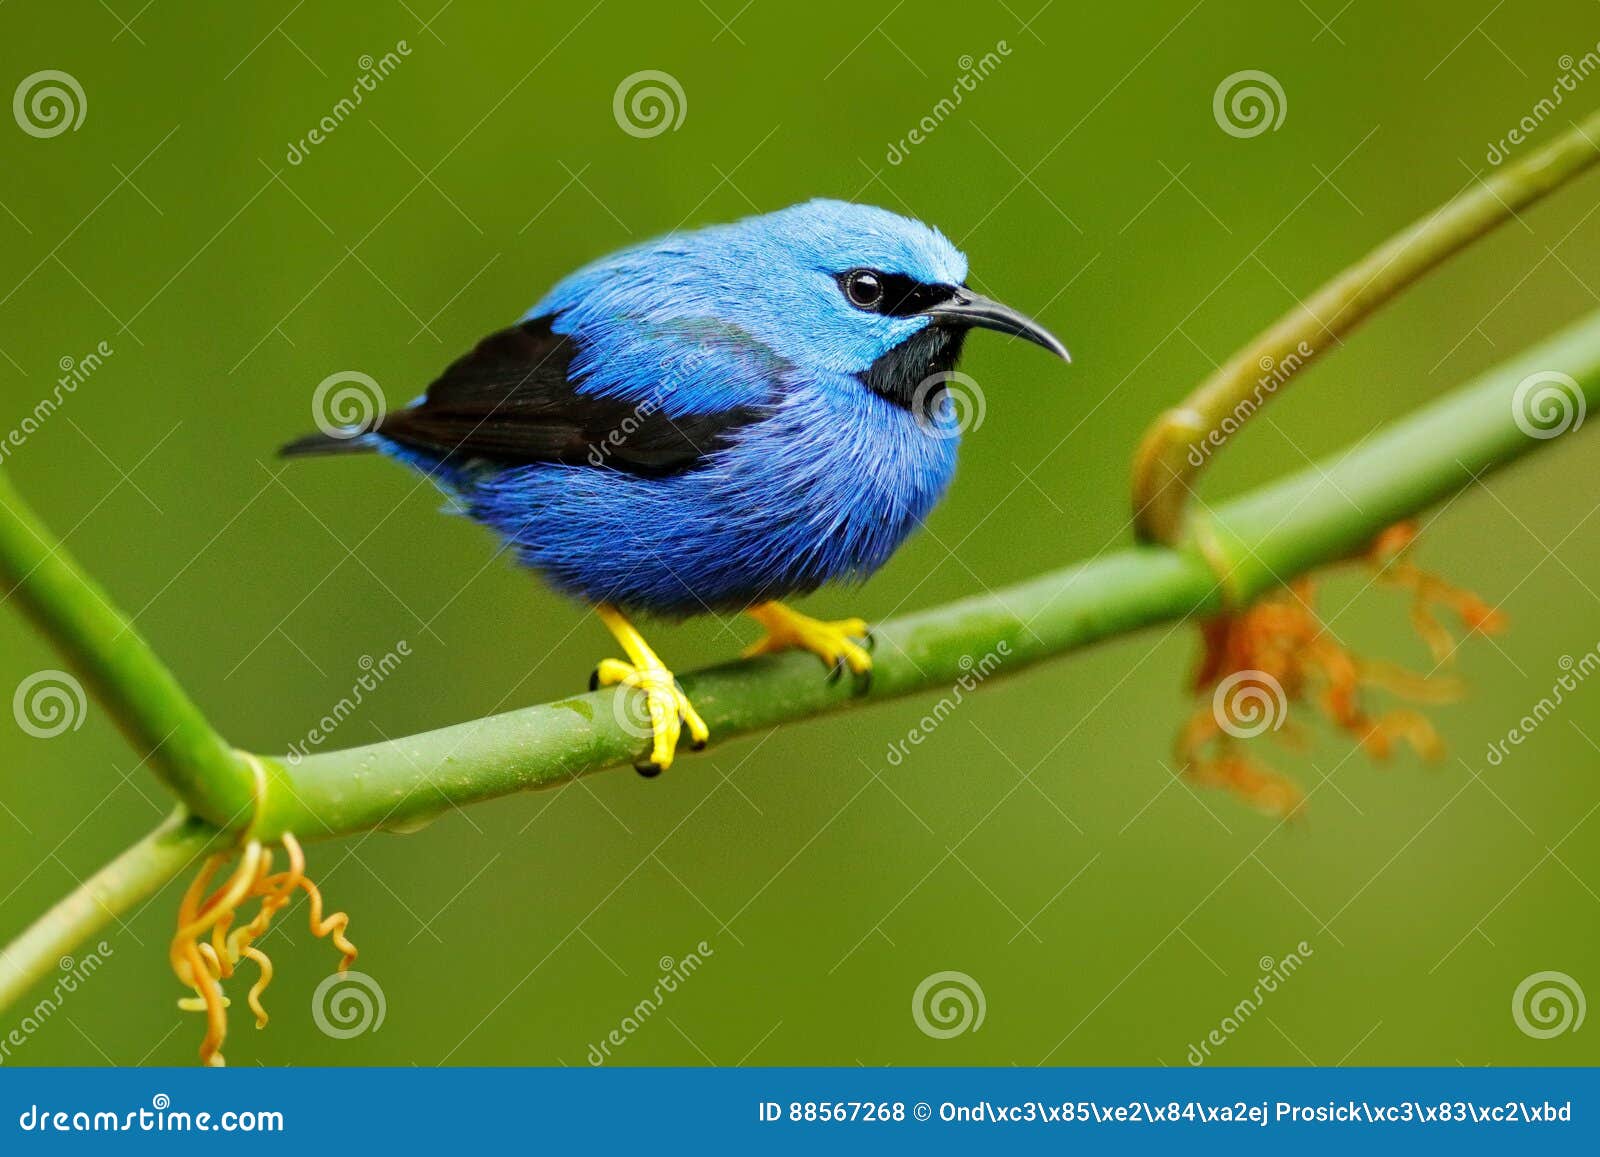 shining honeycreeper, cyanerpes lucidus, exotic tropic blue tanager with yellow leg, costa rica. blue songbird in the nature habit